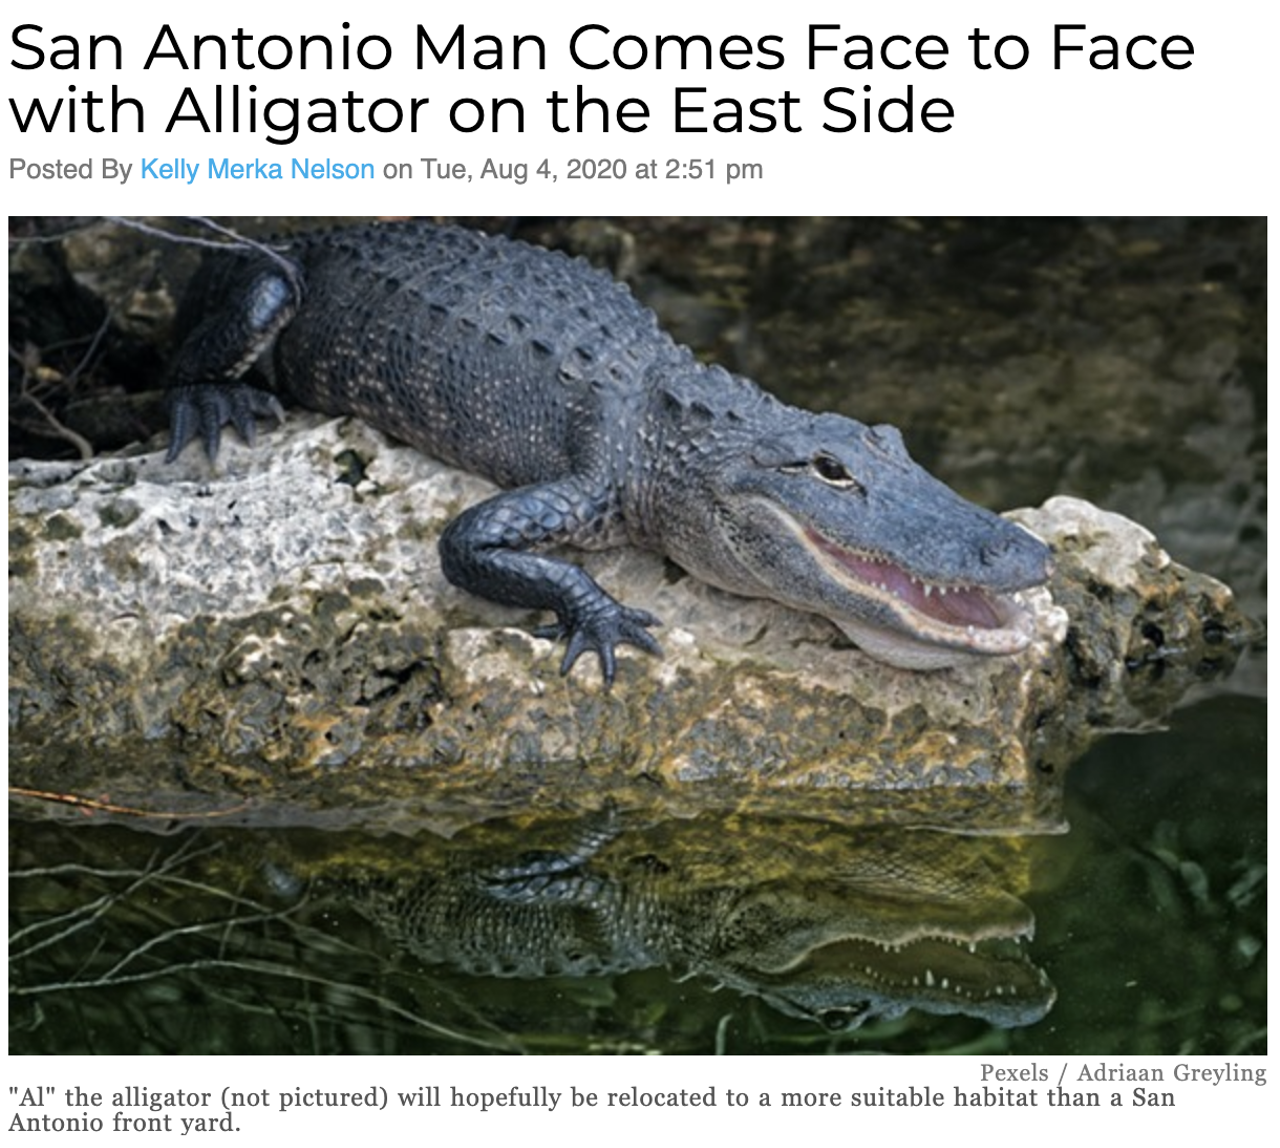 A man taking out the trash on the East Side got a toothy surprise. When performing what should have been a boring chore, the man encountered a five-foot long alligator taking a siesta in his front yard. Read more here.